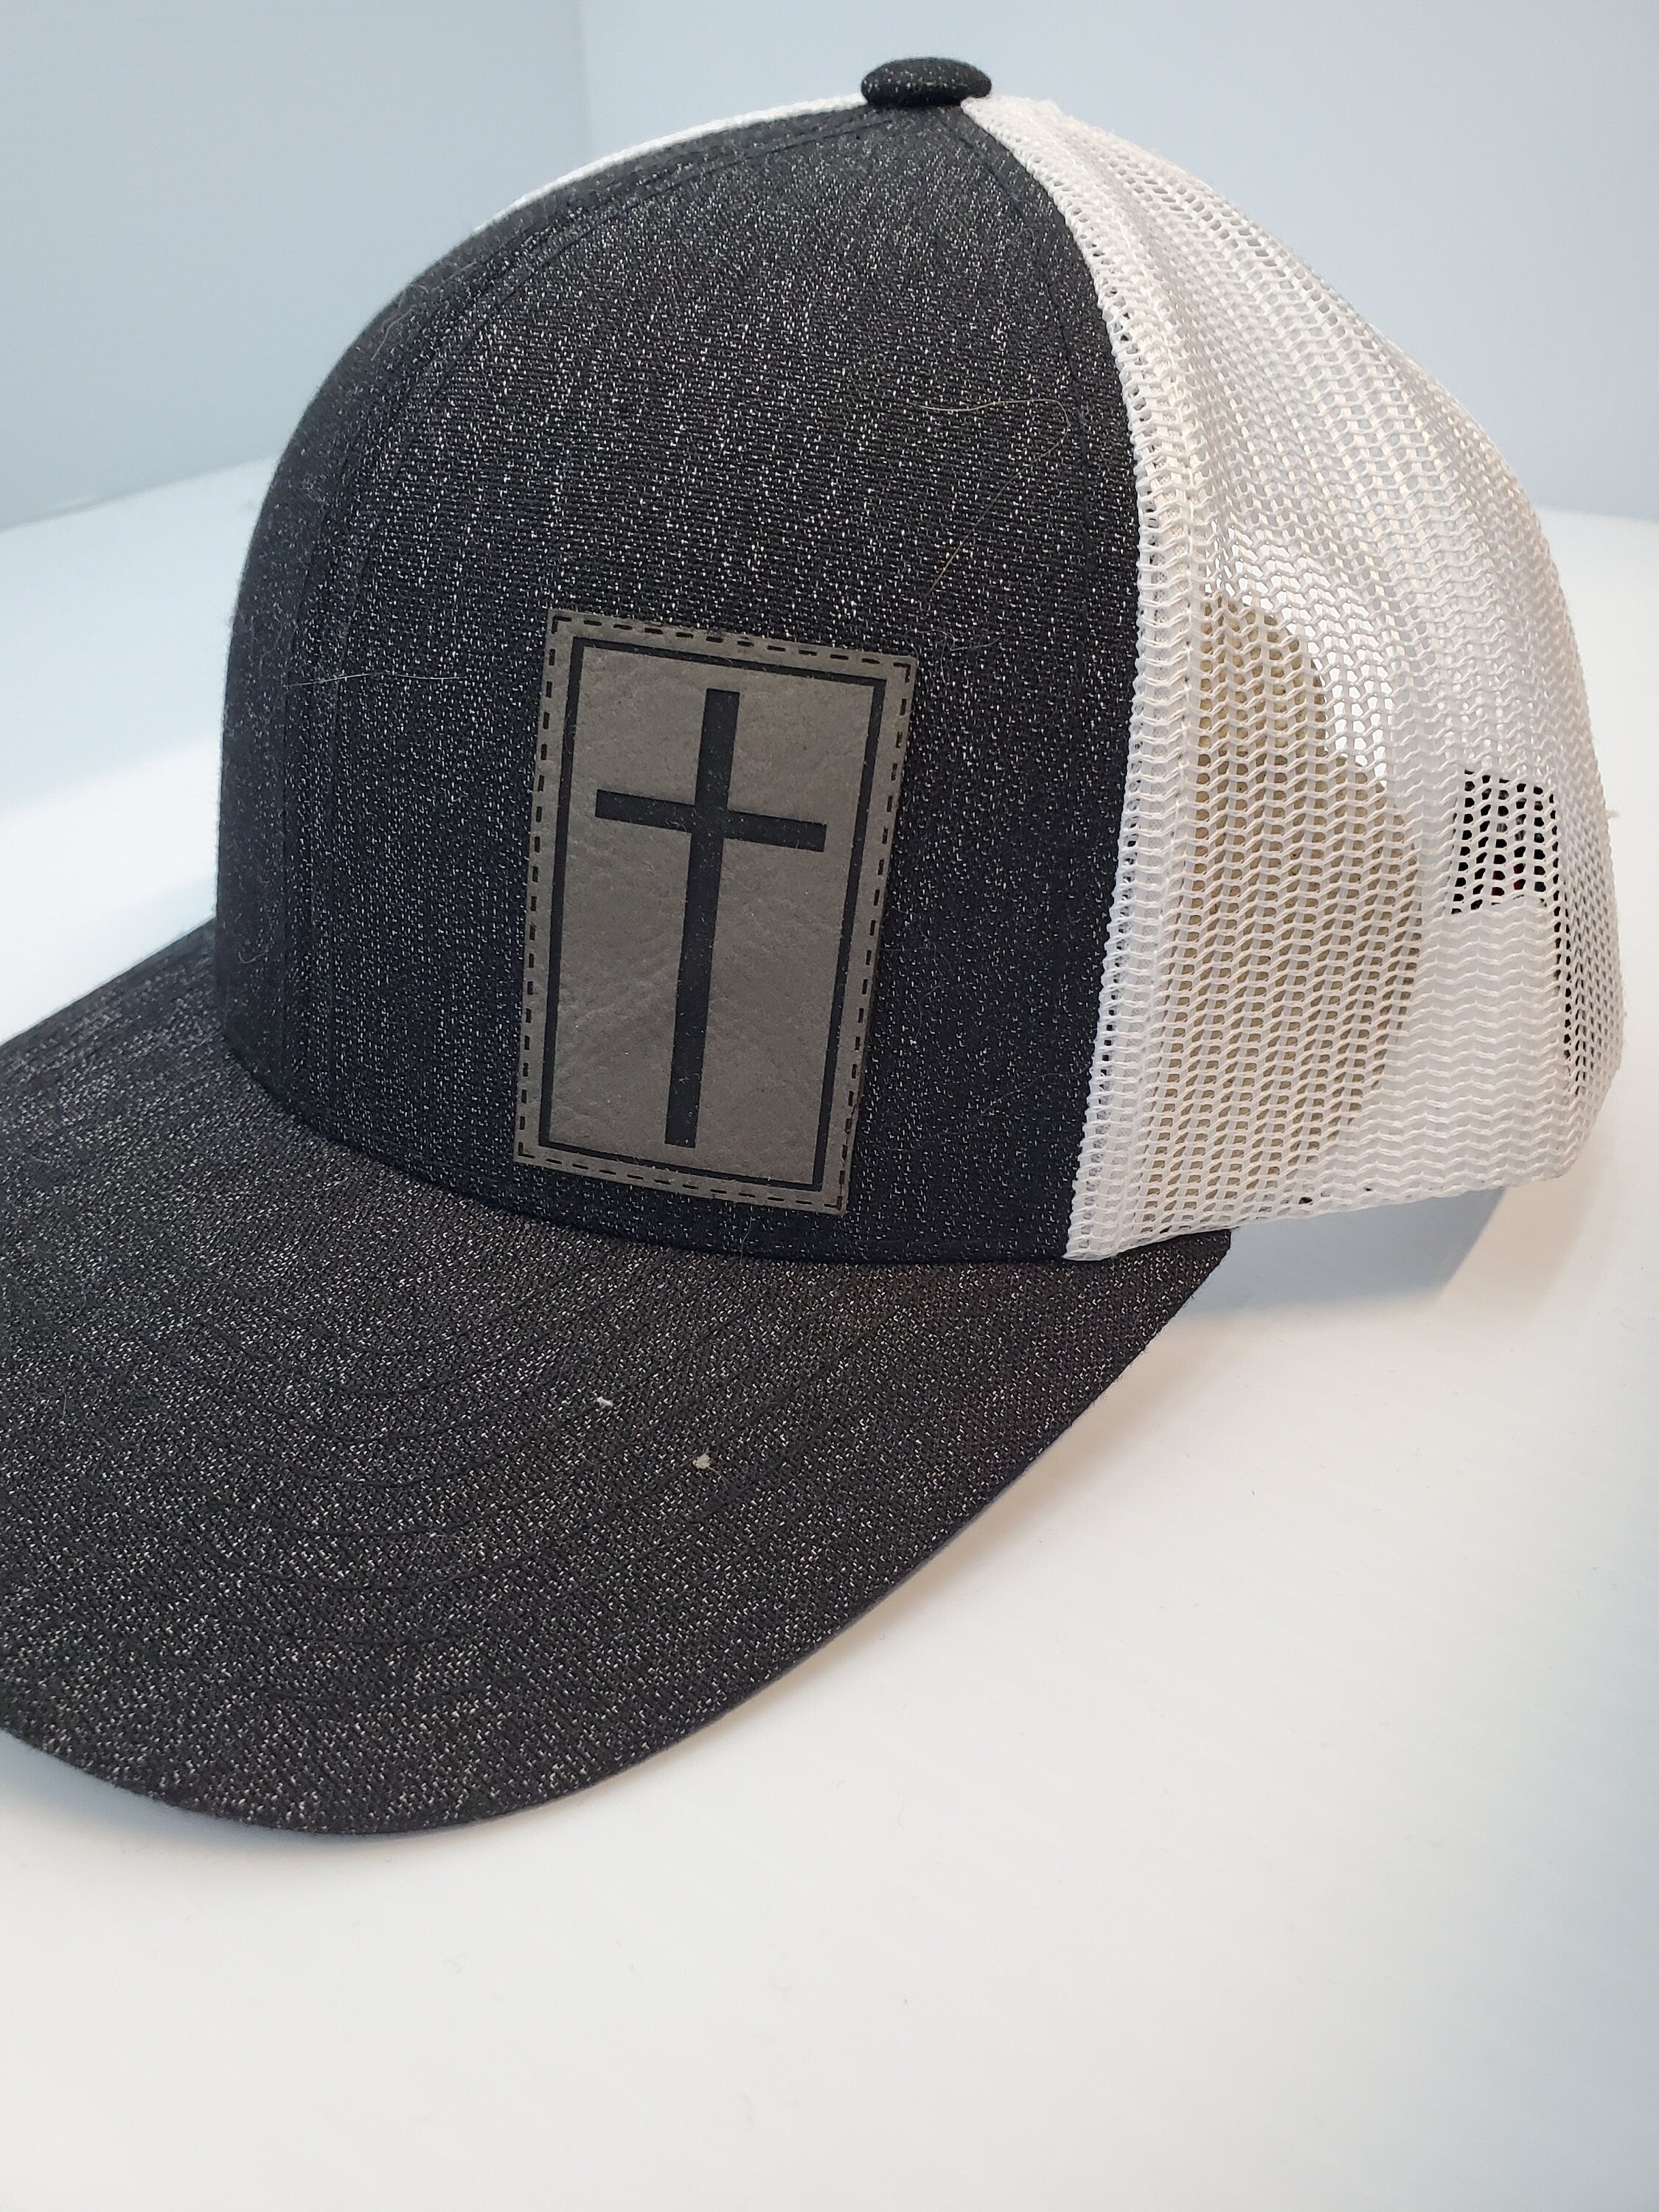 Leather Cross Patch Snapback Hat, Cross Patch, Leather Patch Hat, Custom Hat, Religious hat, Wwjd, God is Good,Custom Hat, religious apparel